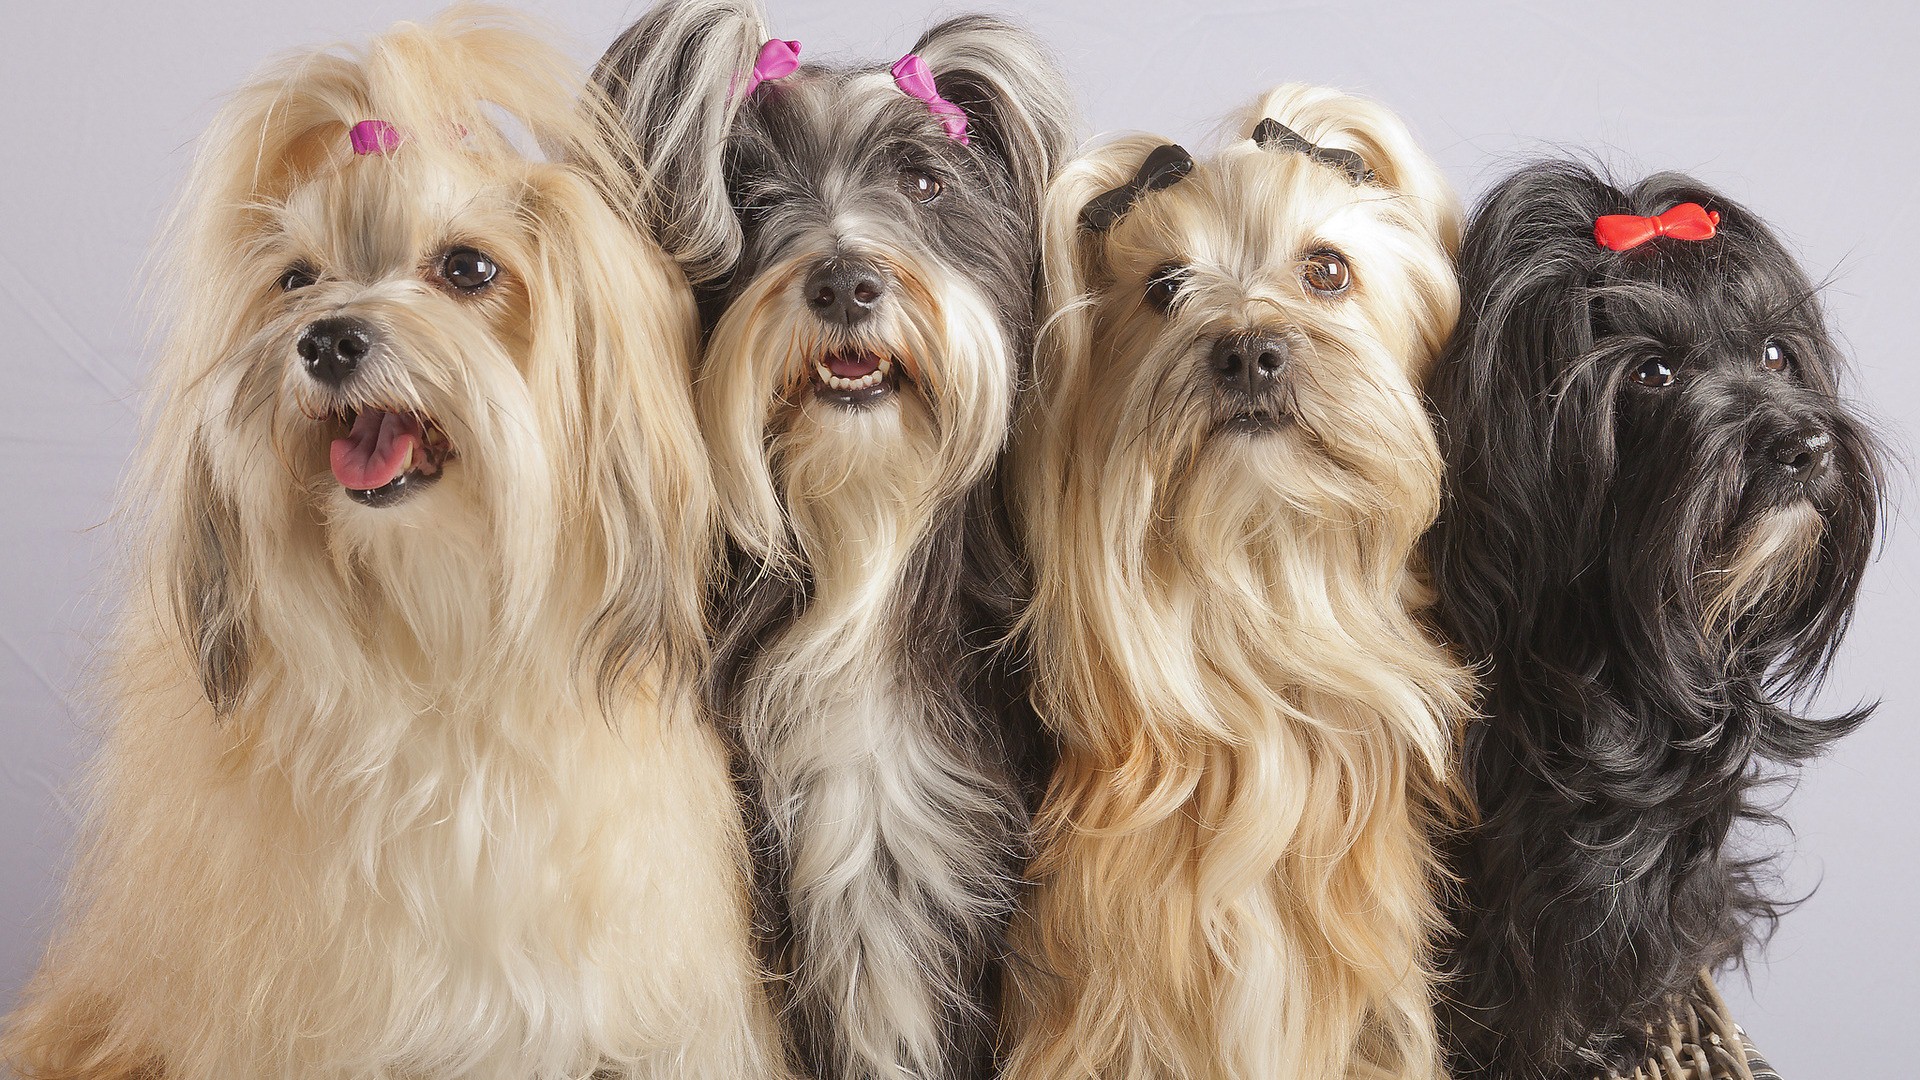 4 Pretty Yorkshire Terrier Dog - Havanese Dog With Long Hair - HD Wallpaper 